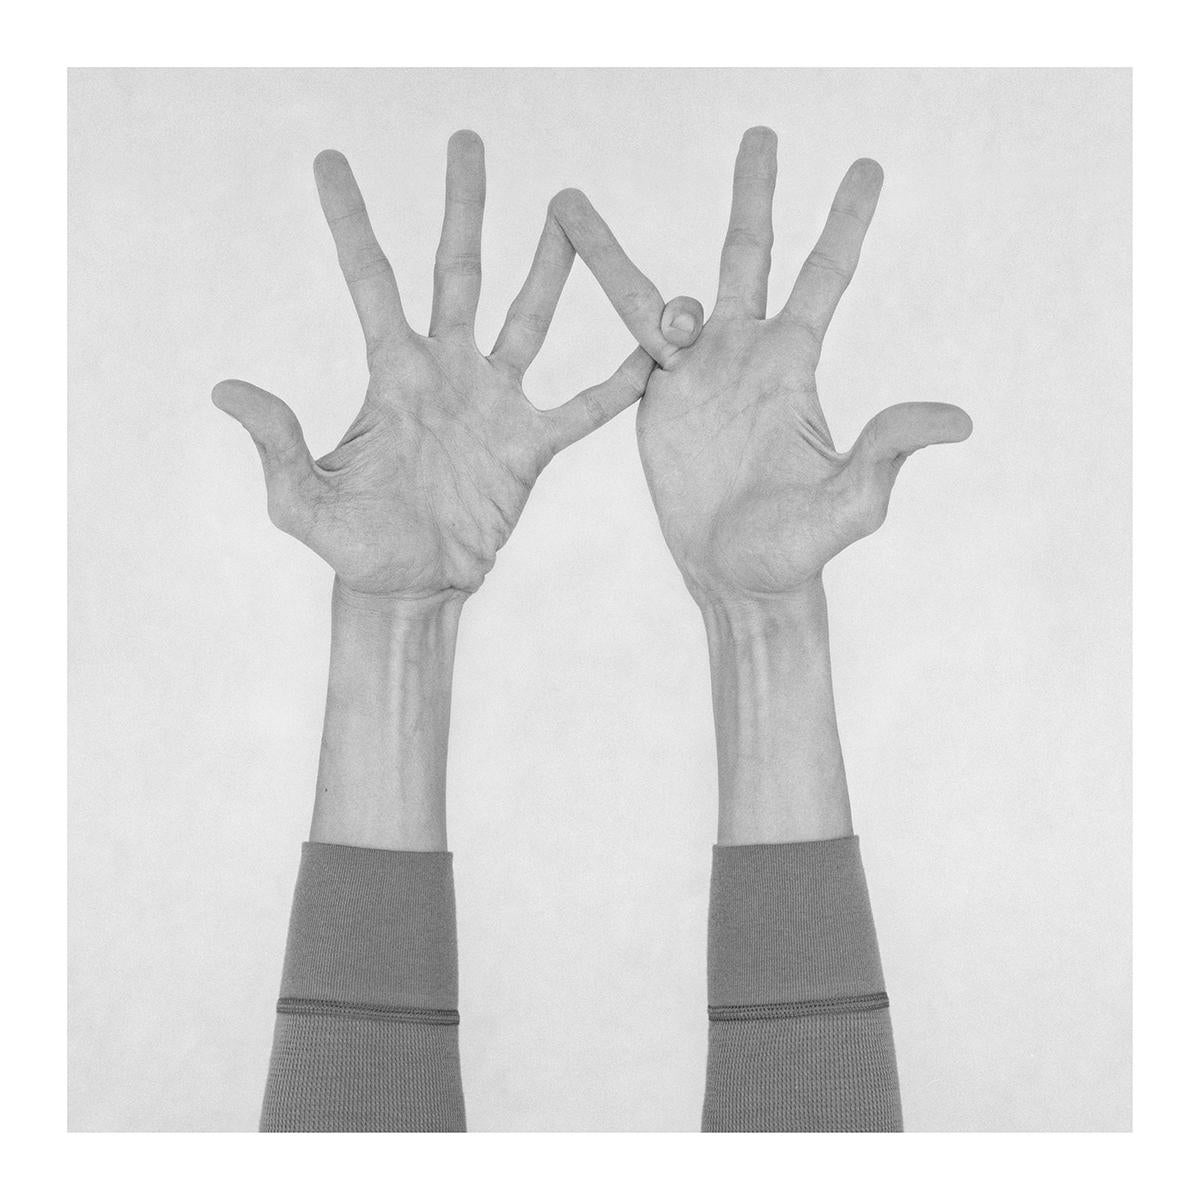 Untitled I, Untitled XI, and Untitled II, Hands. From the Series Chiromorphose - Photograph by Nico Baixas / Gos-com-fuig